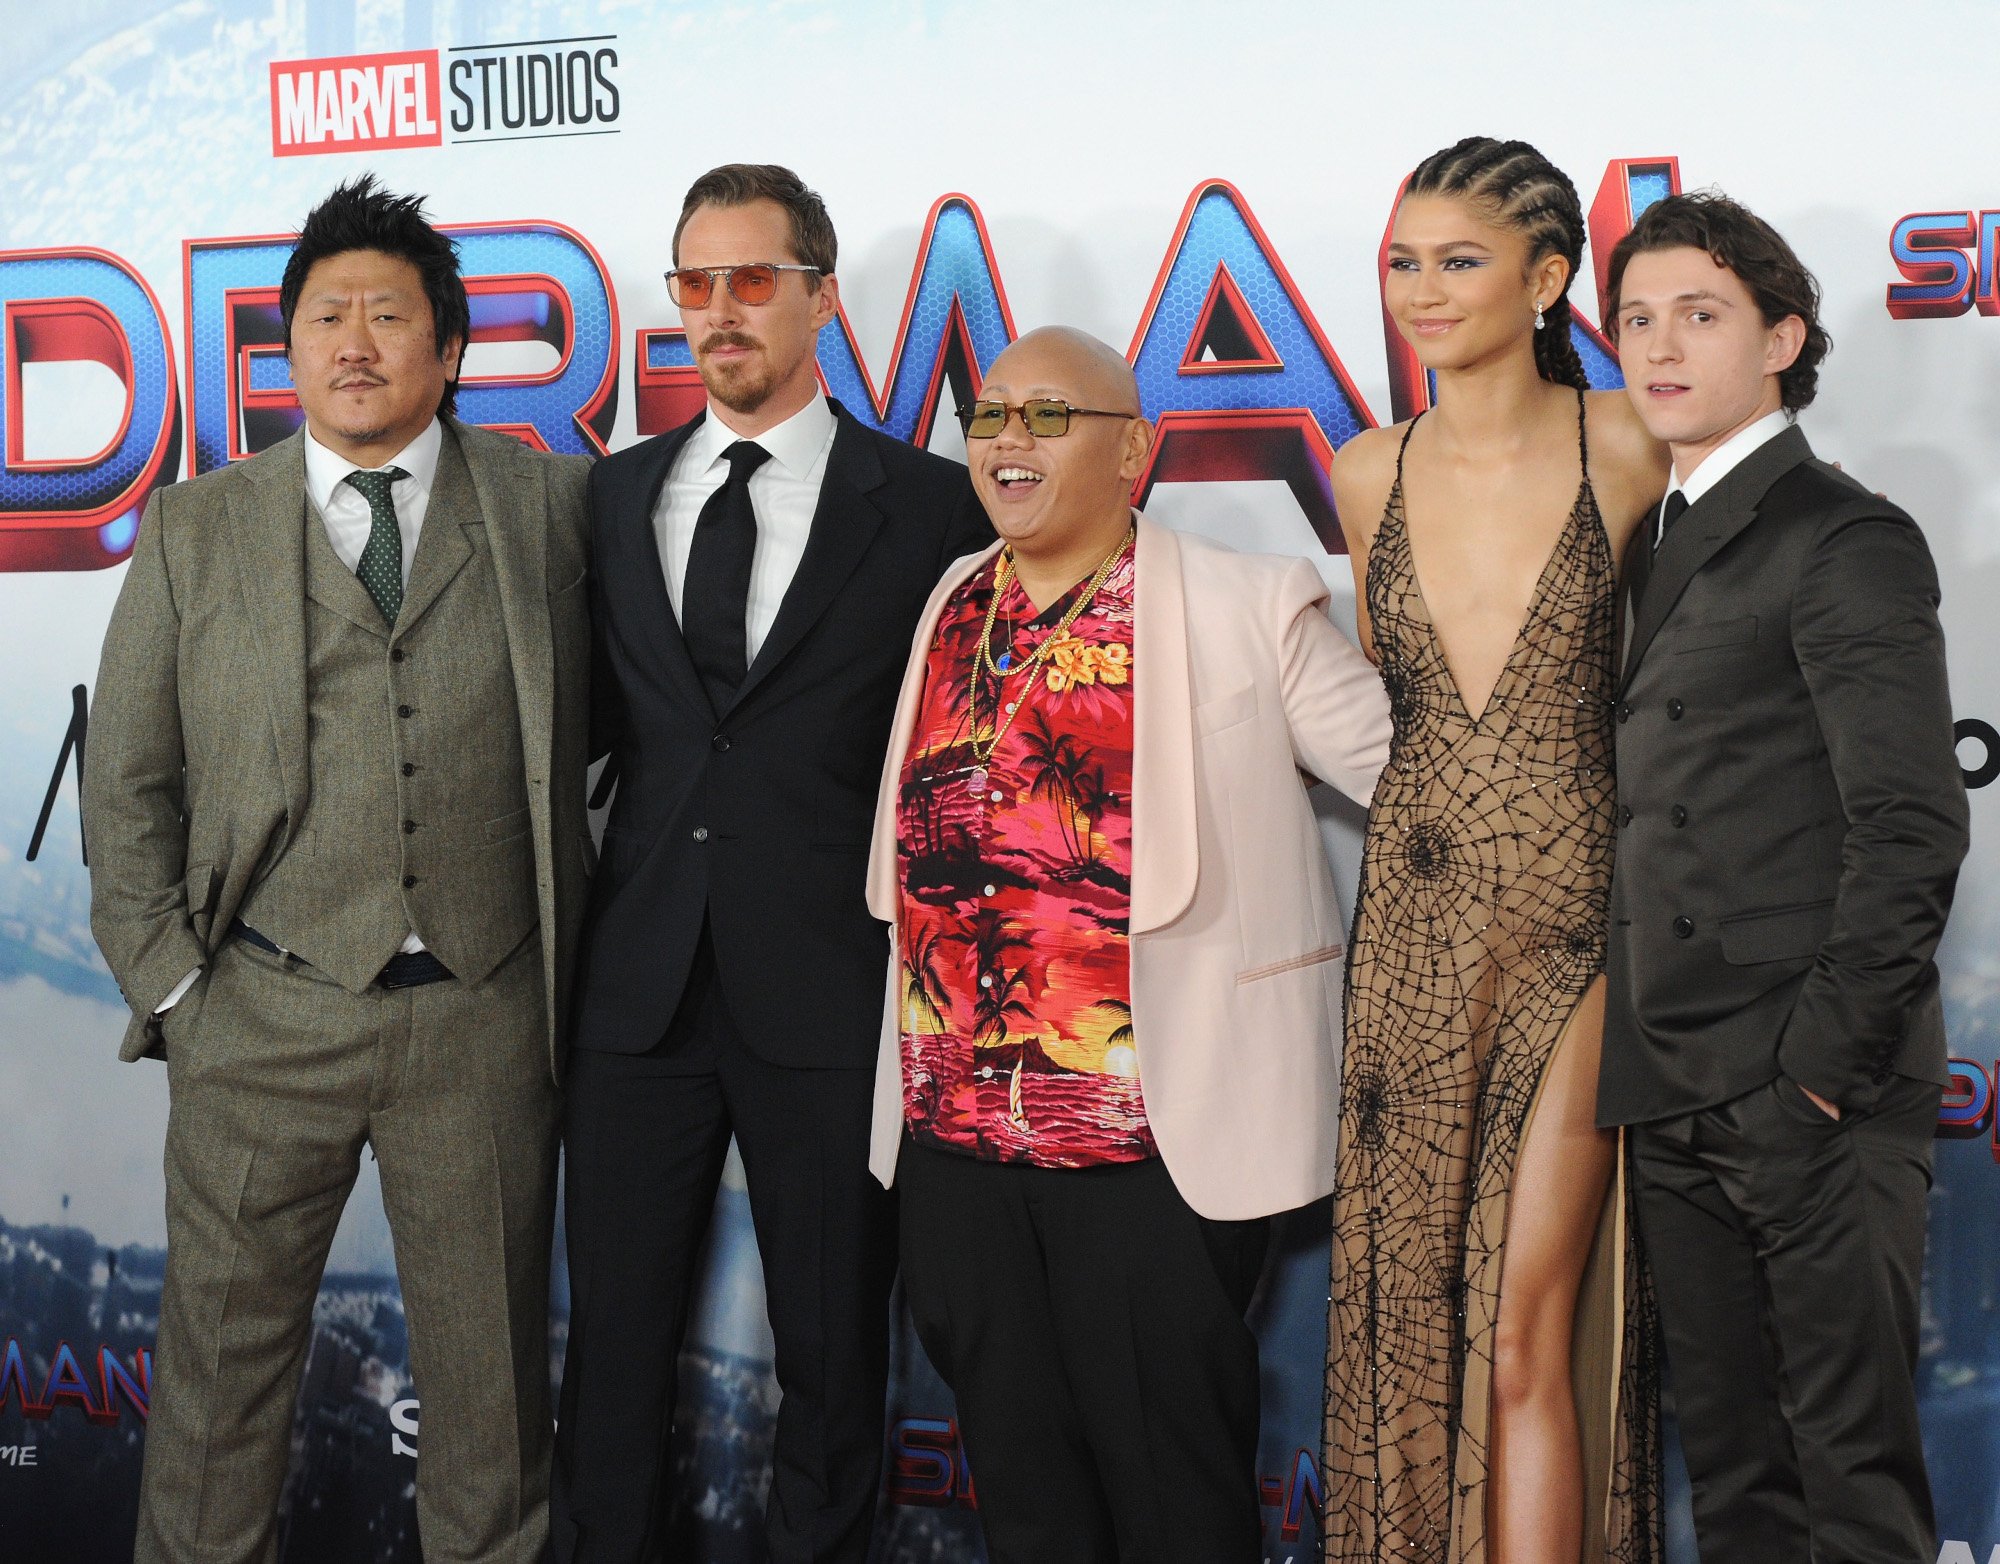 (L-R): Cast members Benedict Wong, Benedict Cumberbatch, Jacob Batalon, Zendaya and Tom Holland on the red carpet for 'Spider-Man: No Way Home's premiere.